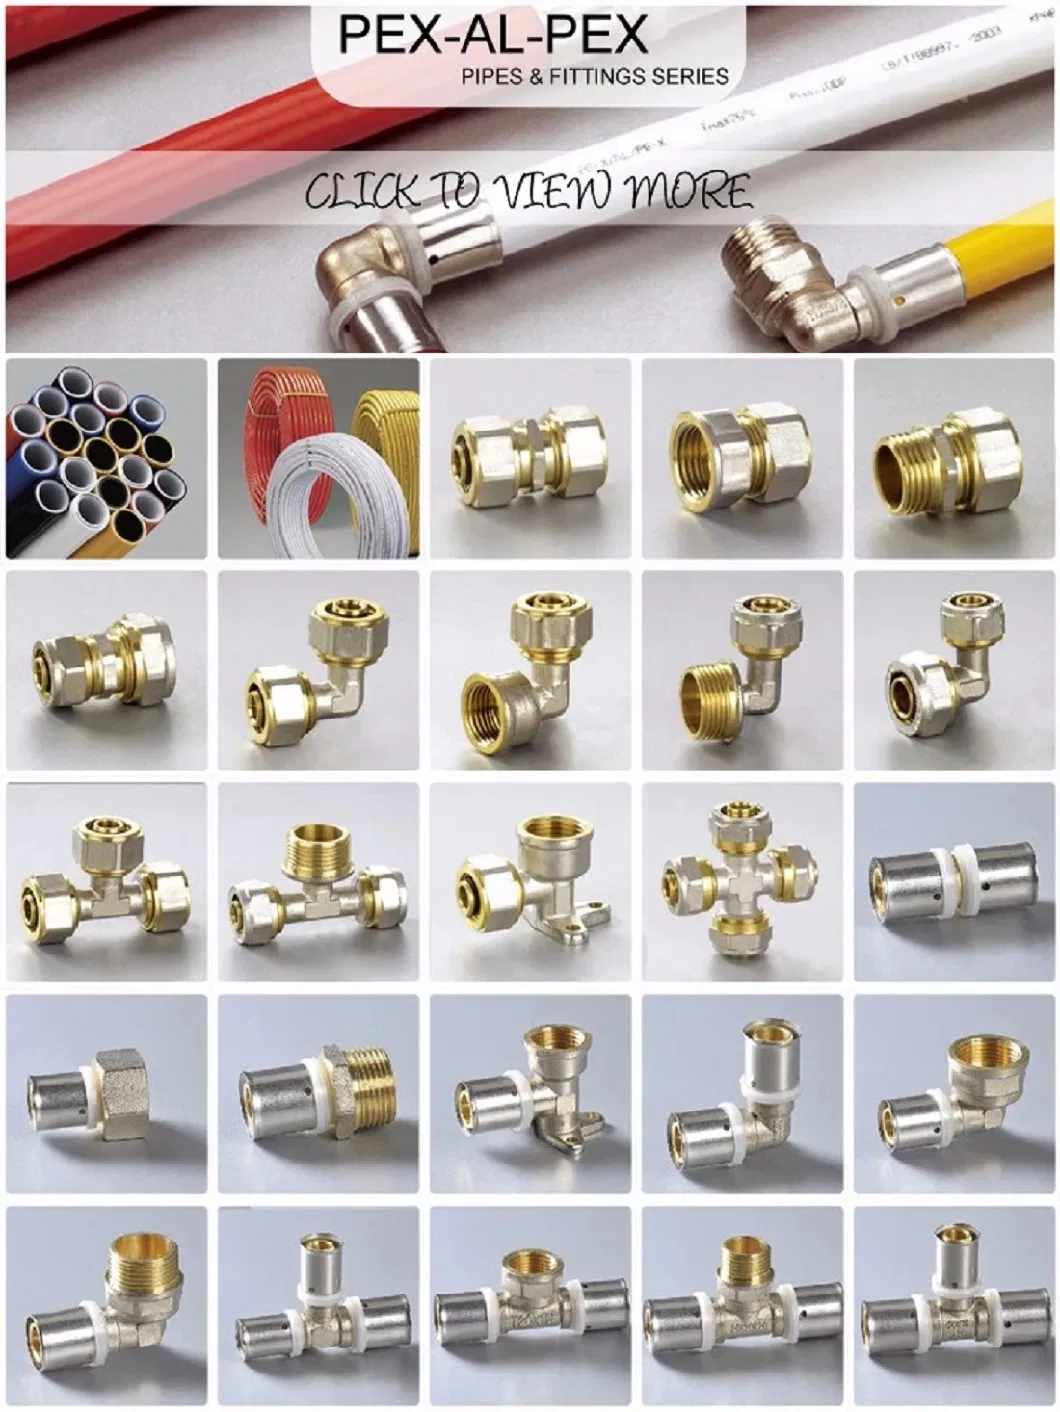 1/2 Inch Slip Ball Valve, Push to Connect Brass Plumbing Fitting, Pex Pipe, Copper, CPVC, PE-Rt, HDPE, UR24735